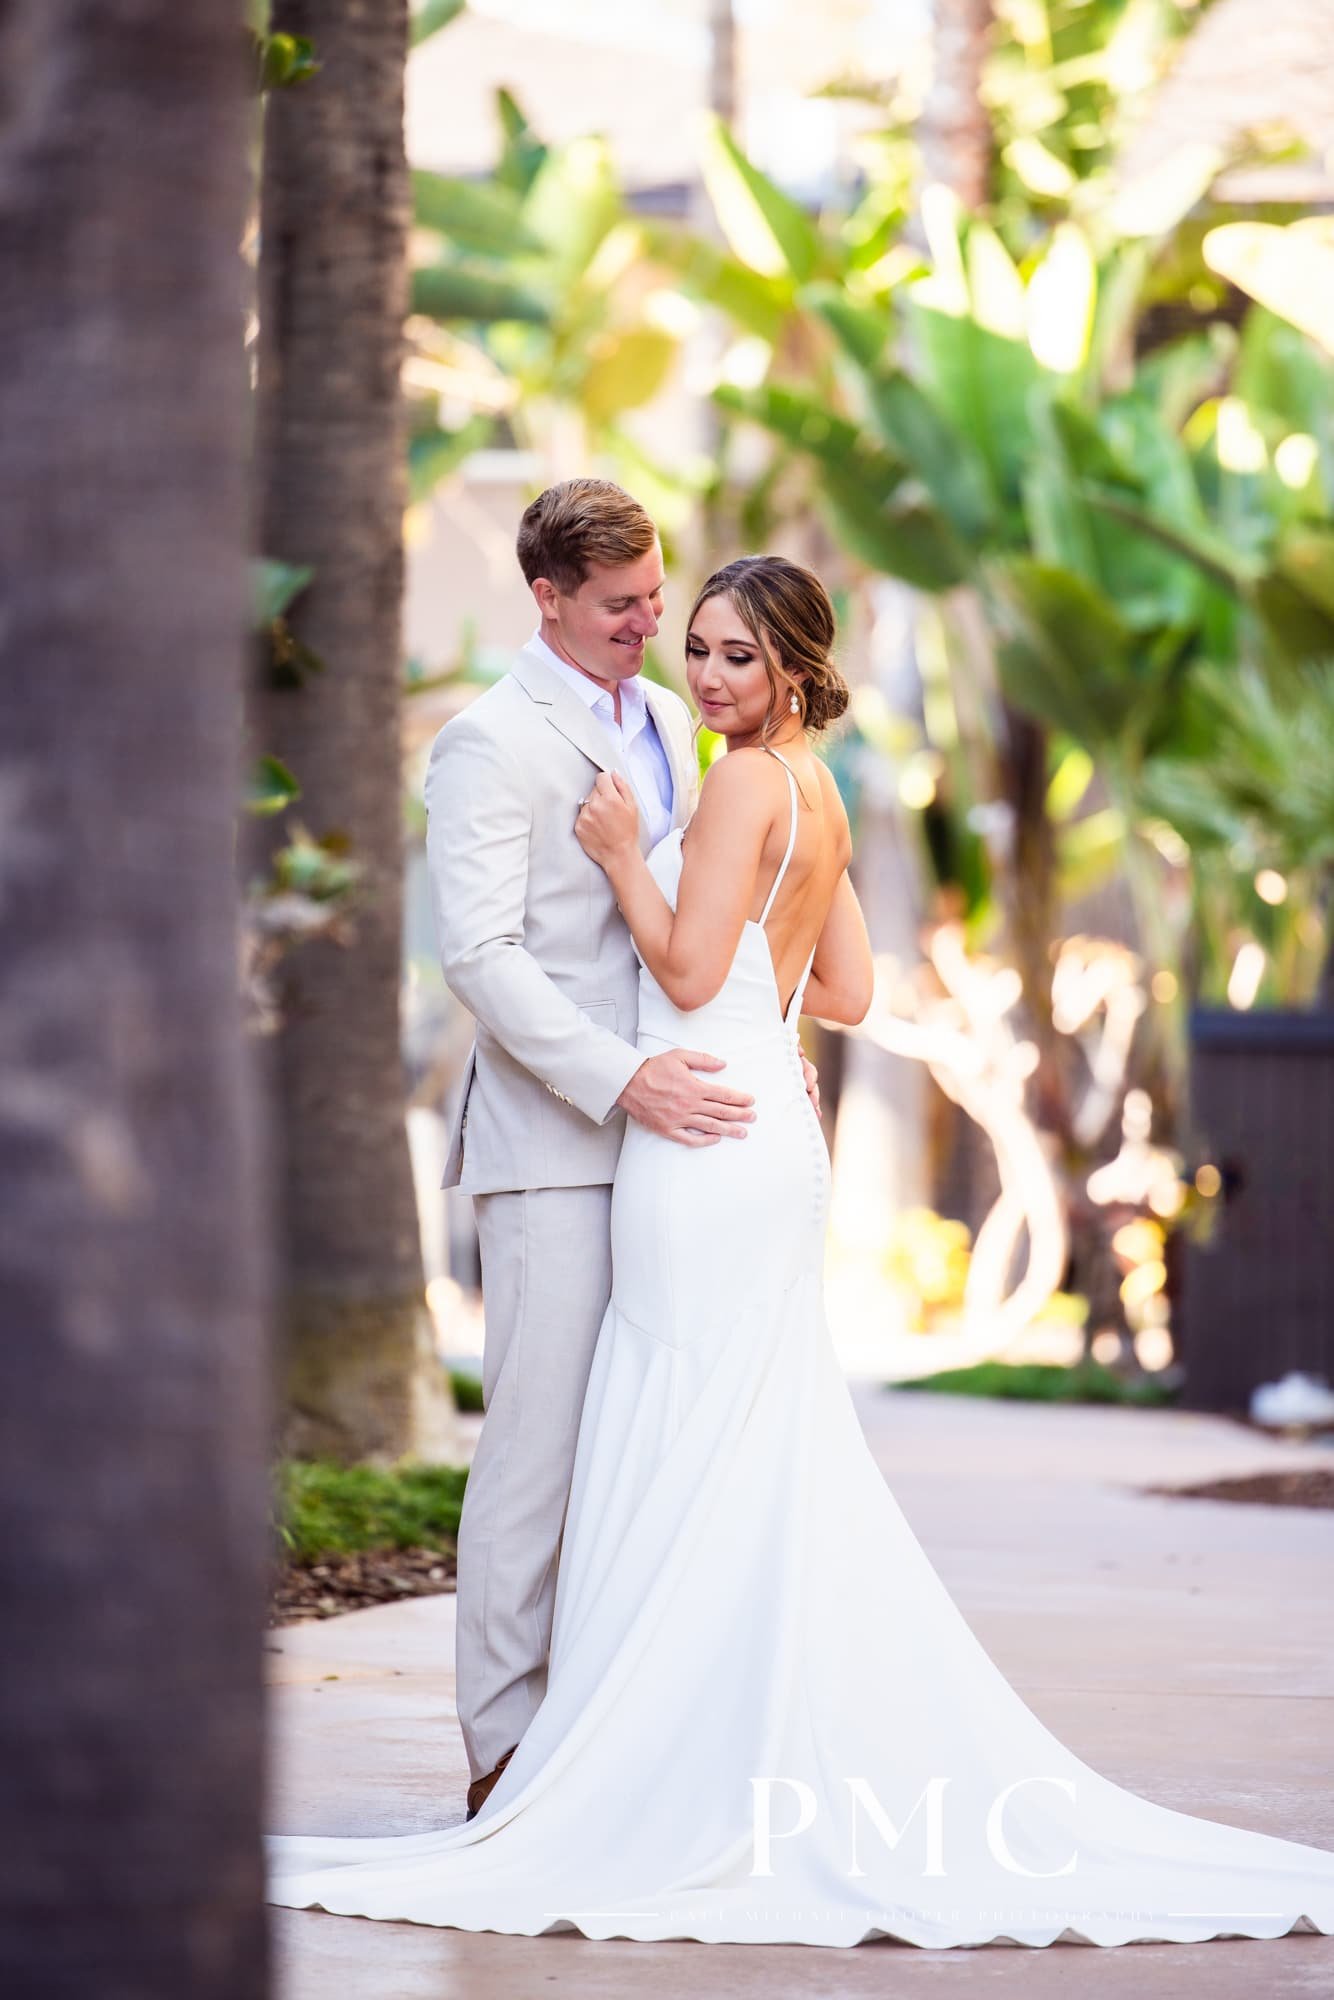 A bride and groom embrace each other in the garden area of the Hyatt Regency Mission Bay Resort.